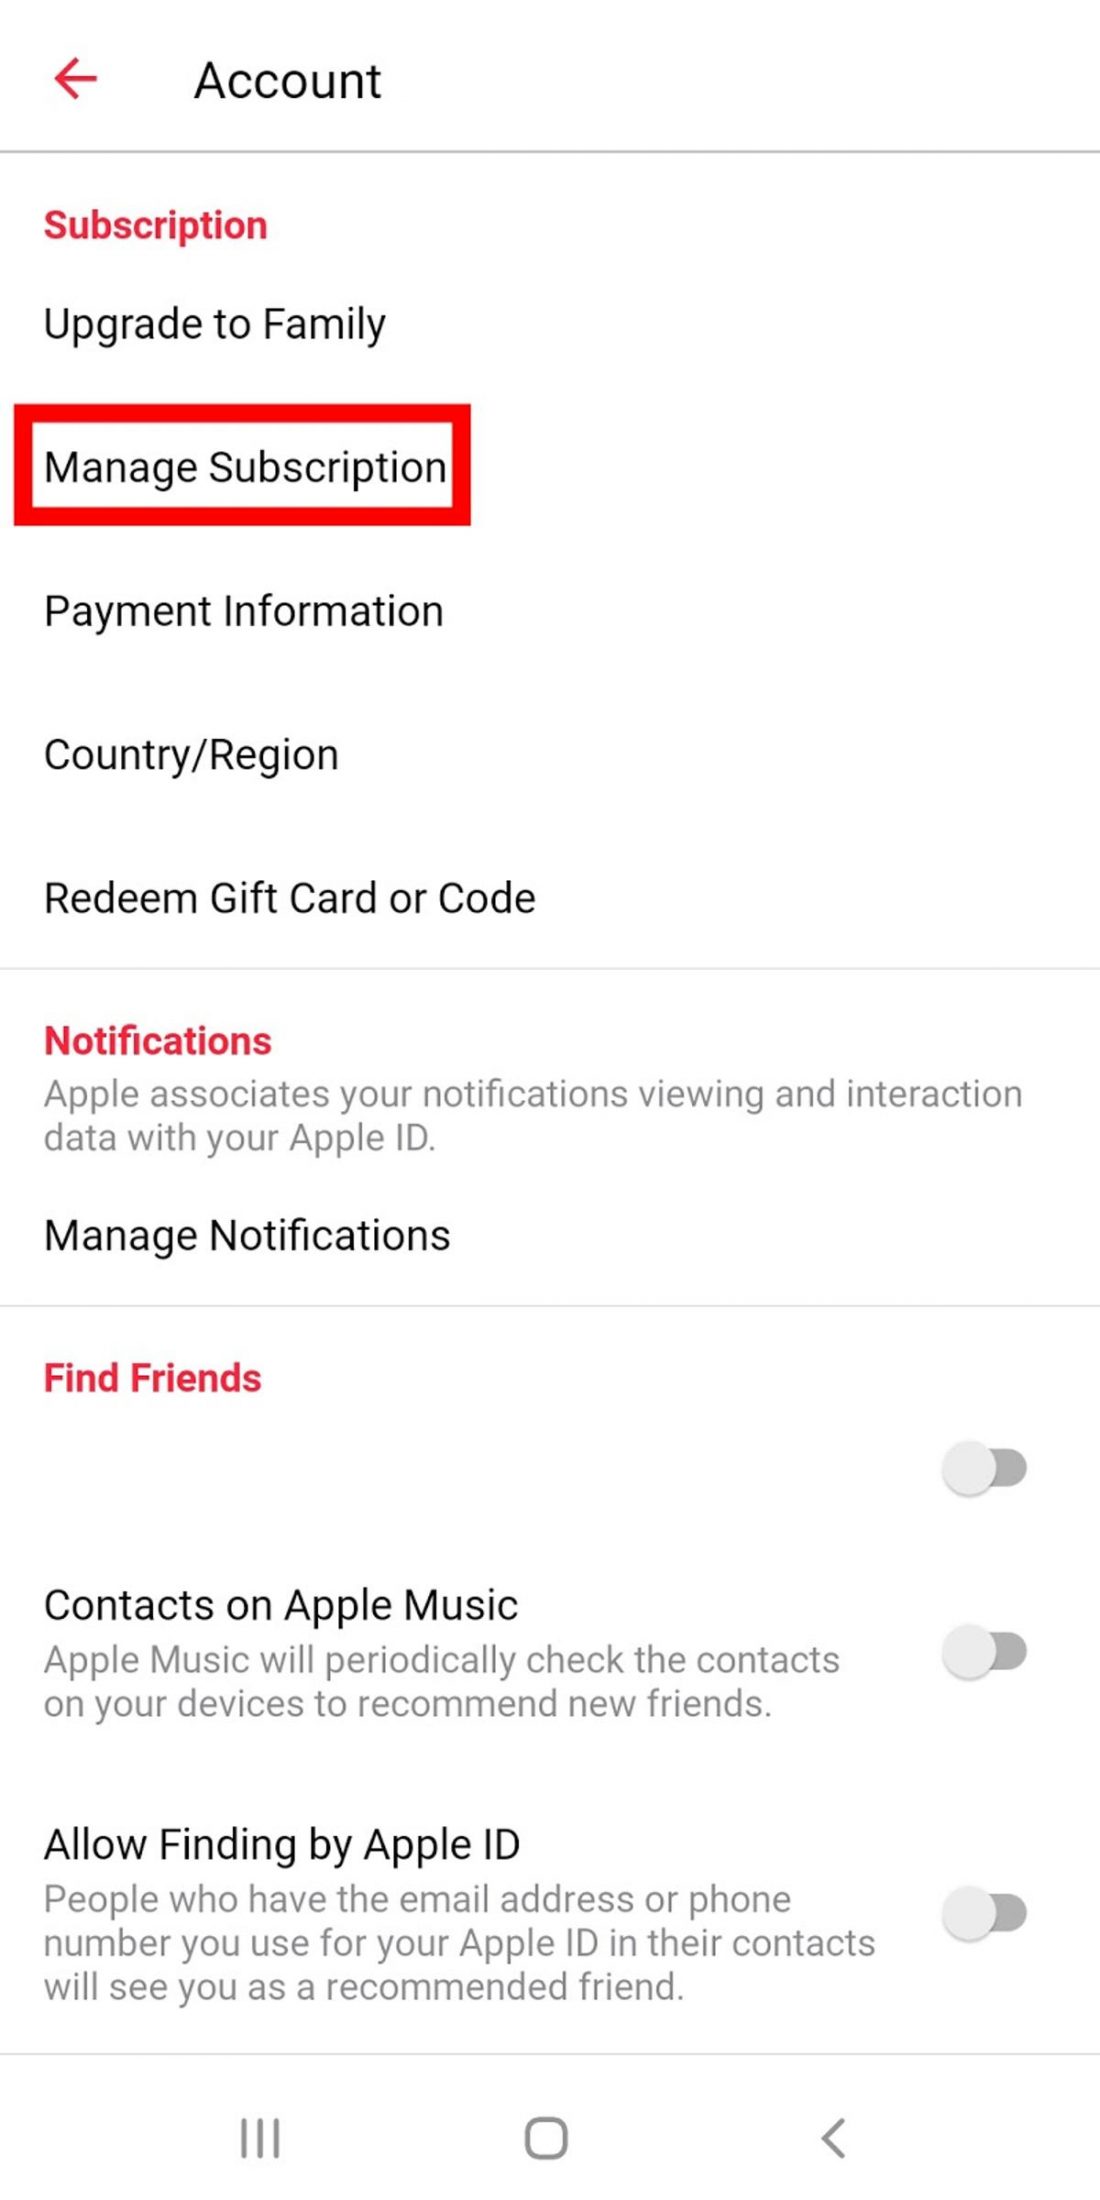 Accessing Subscription settings on Apple Music mobile app.